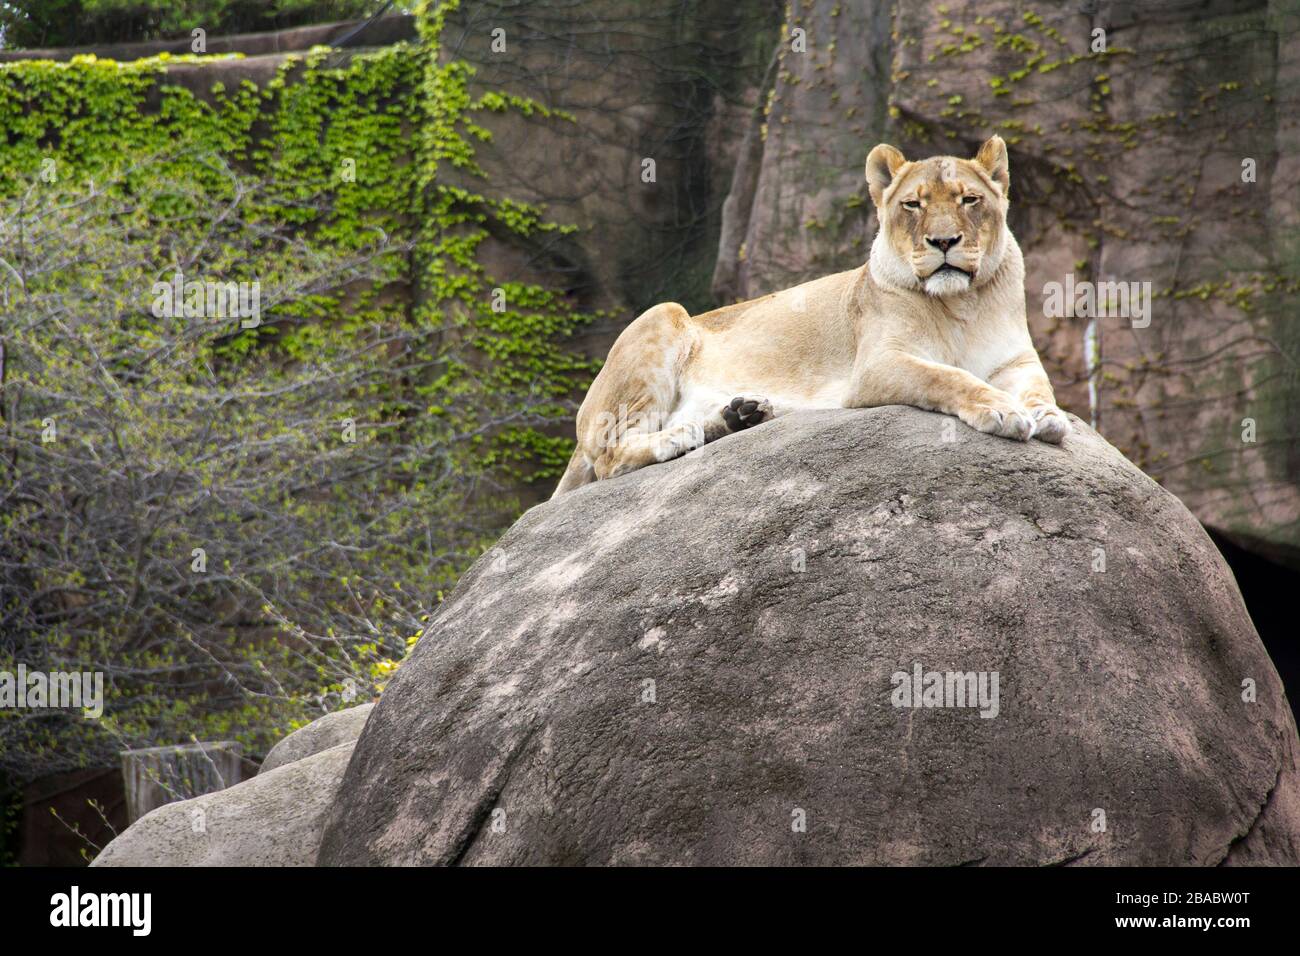 African lion (Panthera leo krugeri) in Lincoln Park Zoo, Lincoln Park, Chicago, Illinois, USA Stock Photo